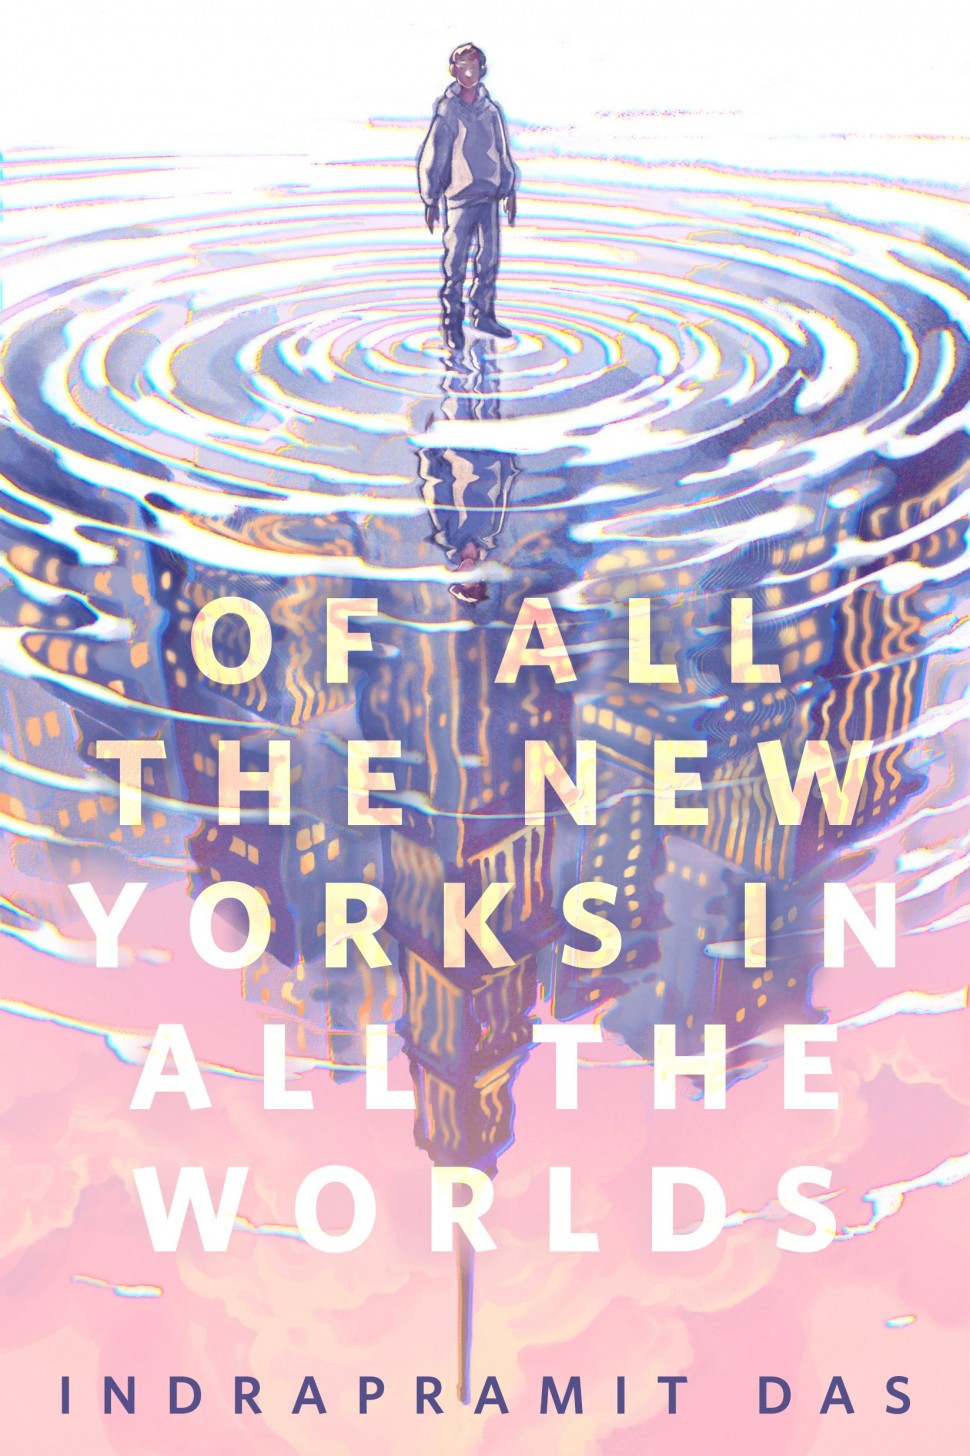 Art by Ashley Mackenzie of a young brown man in hoodie and trousers standing in a rippling pool of water that reflects New York City and its lights below his feet.